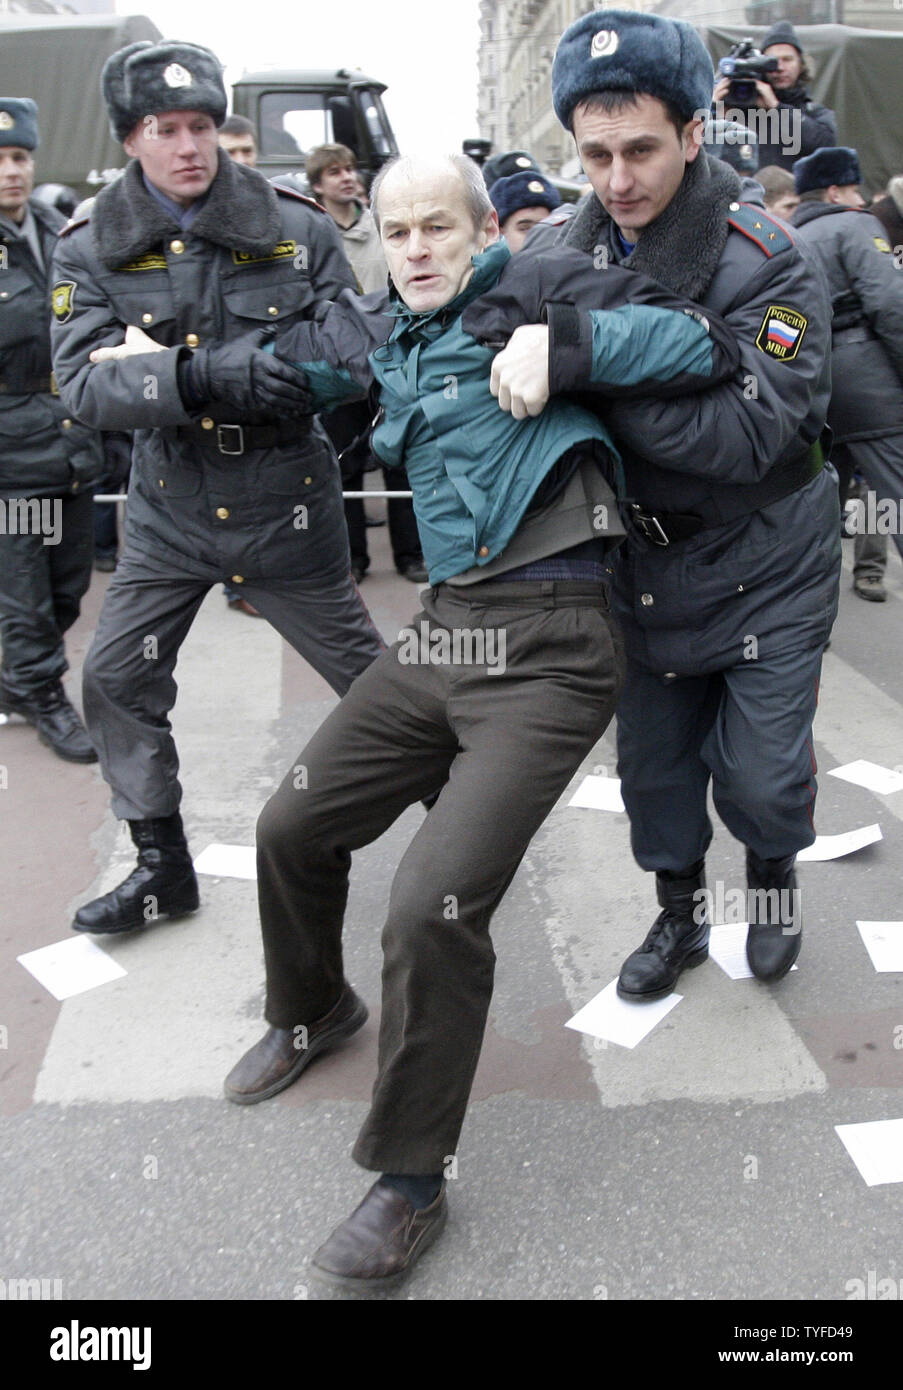 Russian riot police officers detain opposition activists during an  opposition rally called "Dissenter's March" in Moscow on December 14, 2008.  At least 150 people were arrested on Sunday in Moscow and St